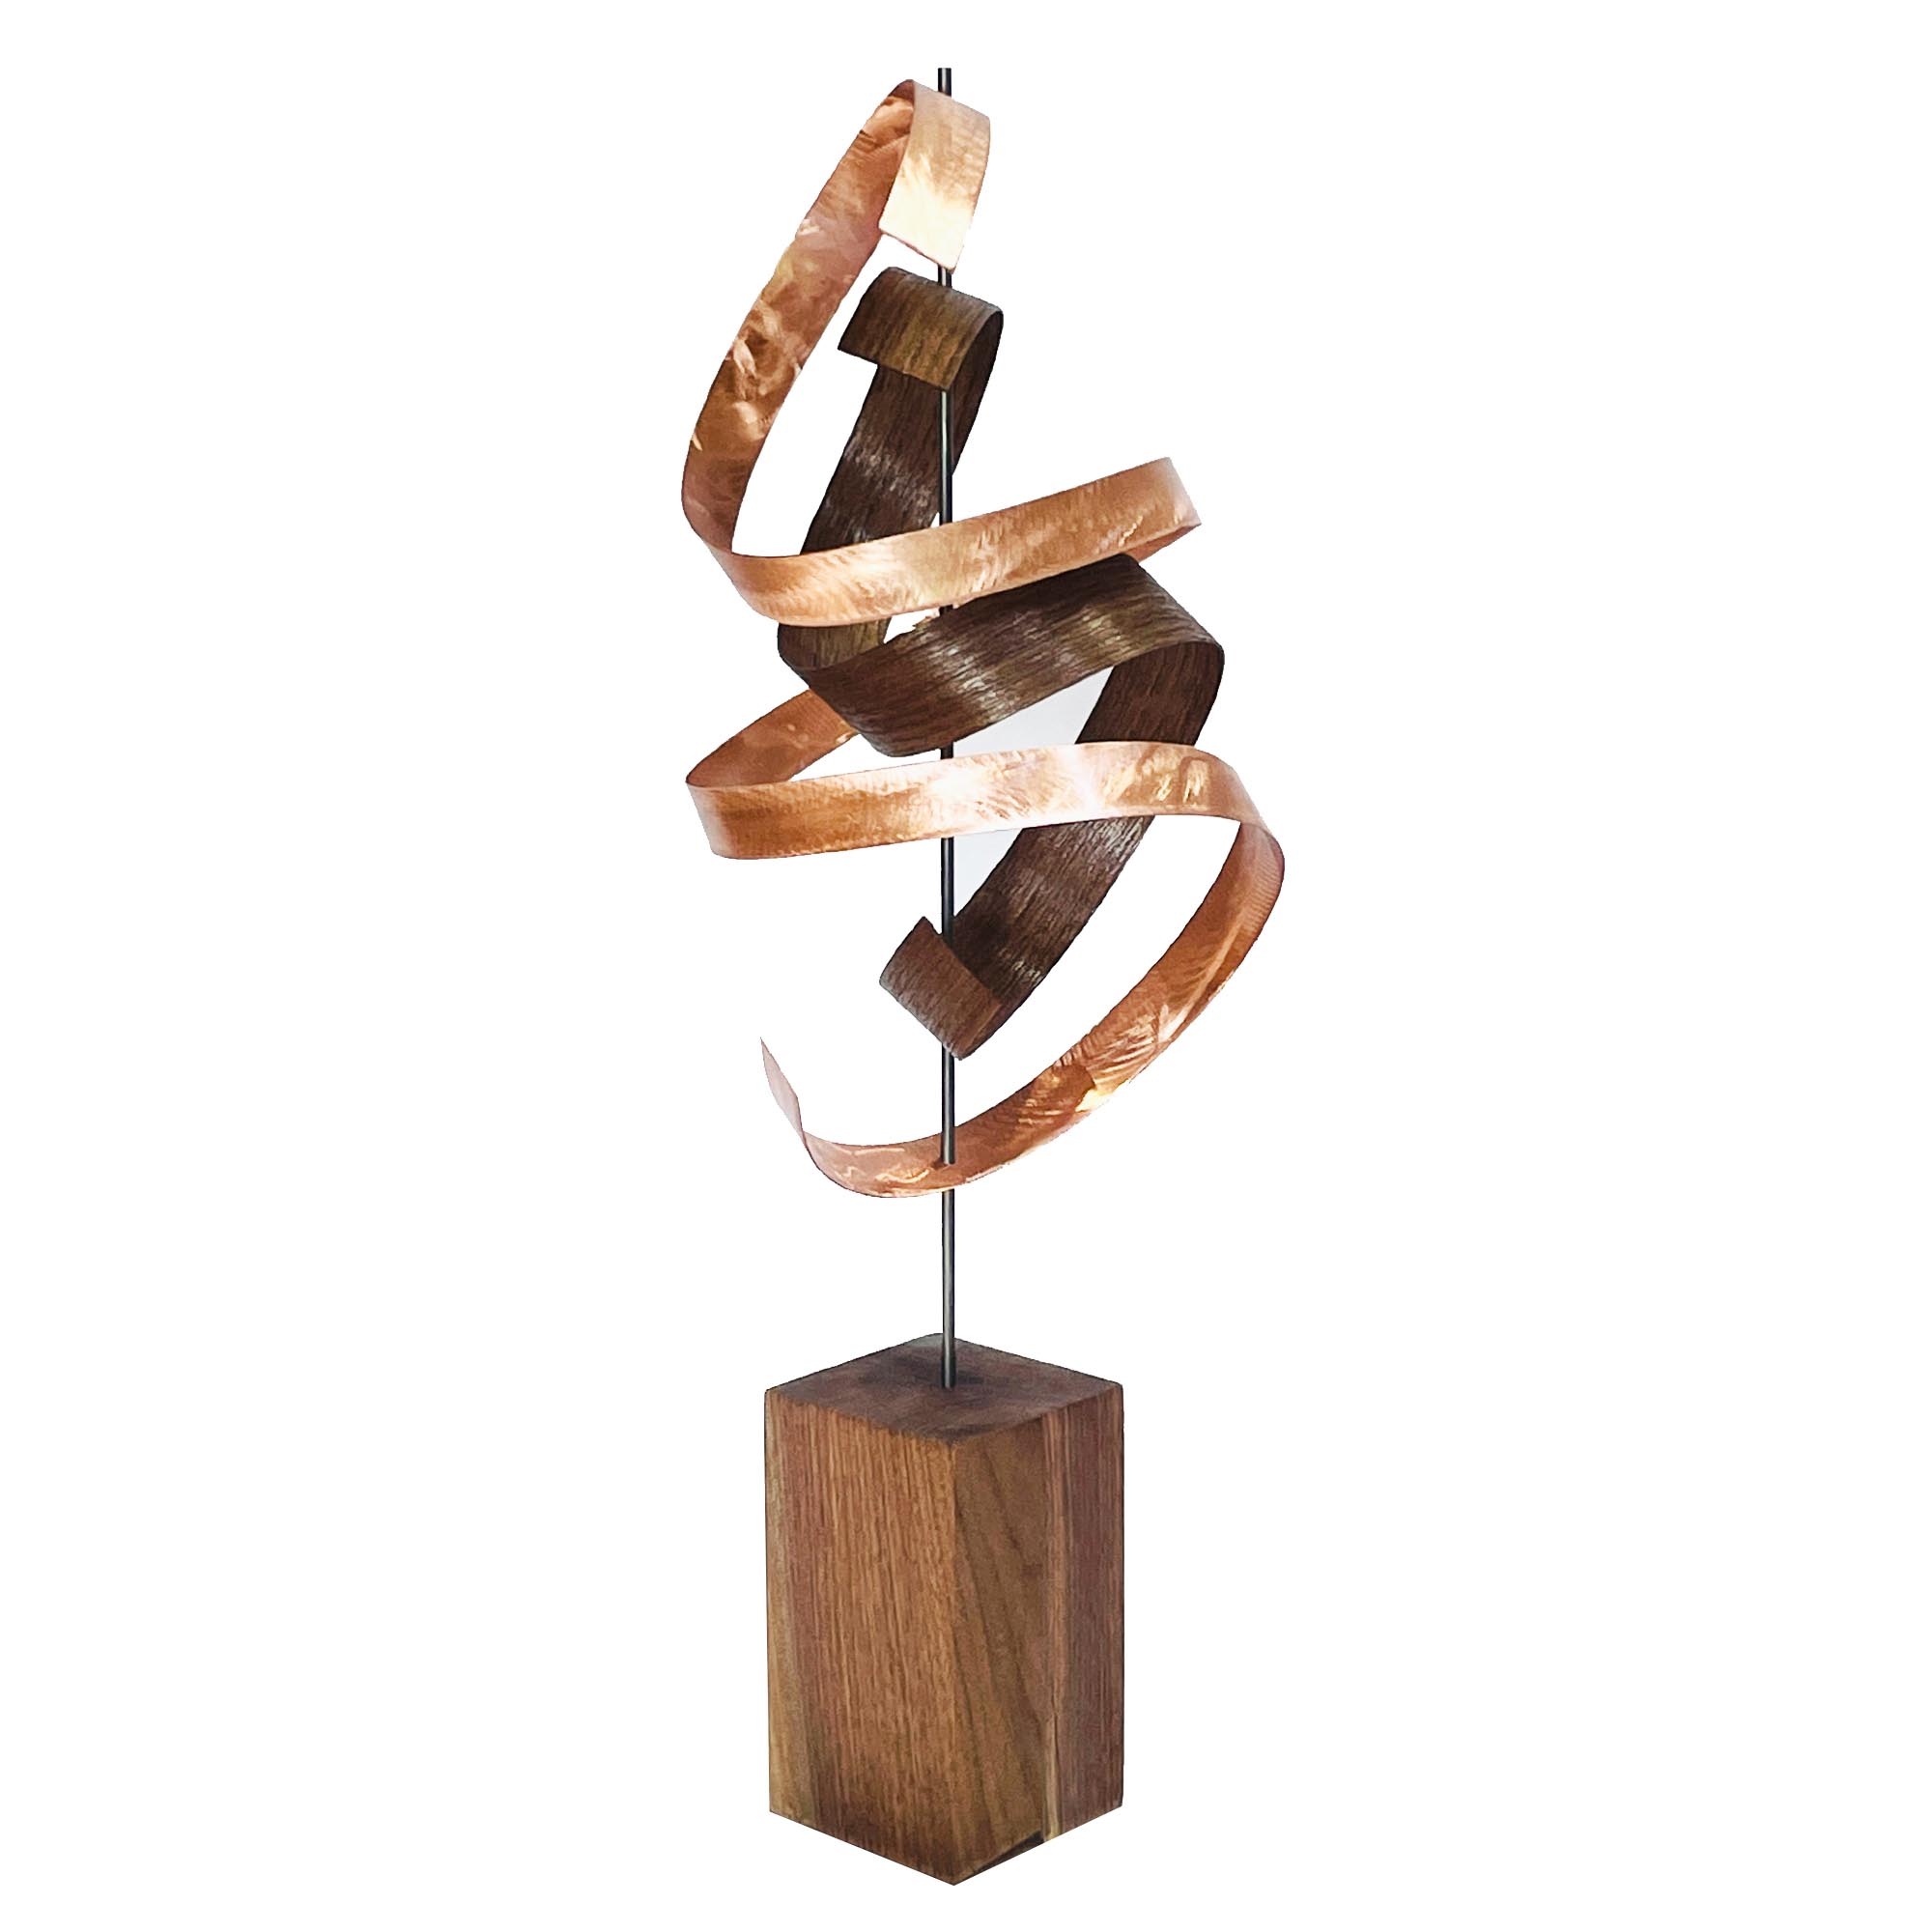 Waltz v2 Copper Walnut by Jackson Wright - Abstract Wood Sculpture, Kinetic Sculpture - Image 2